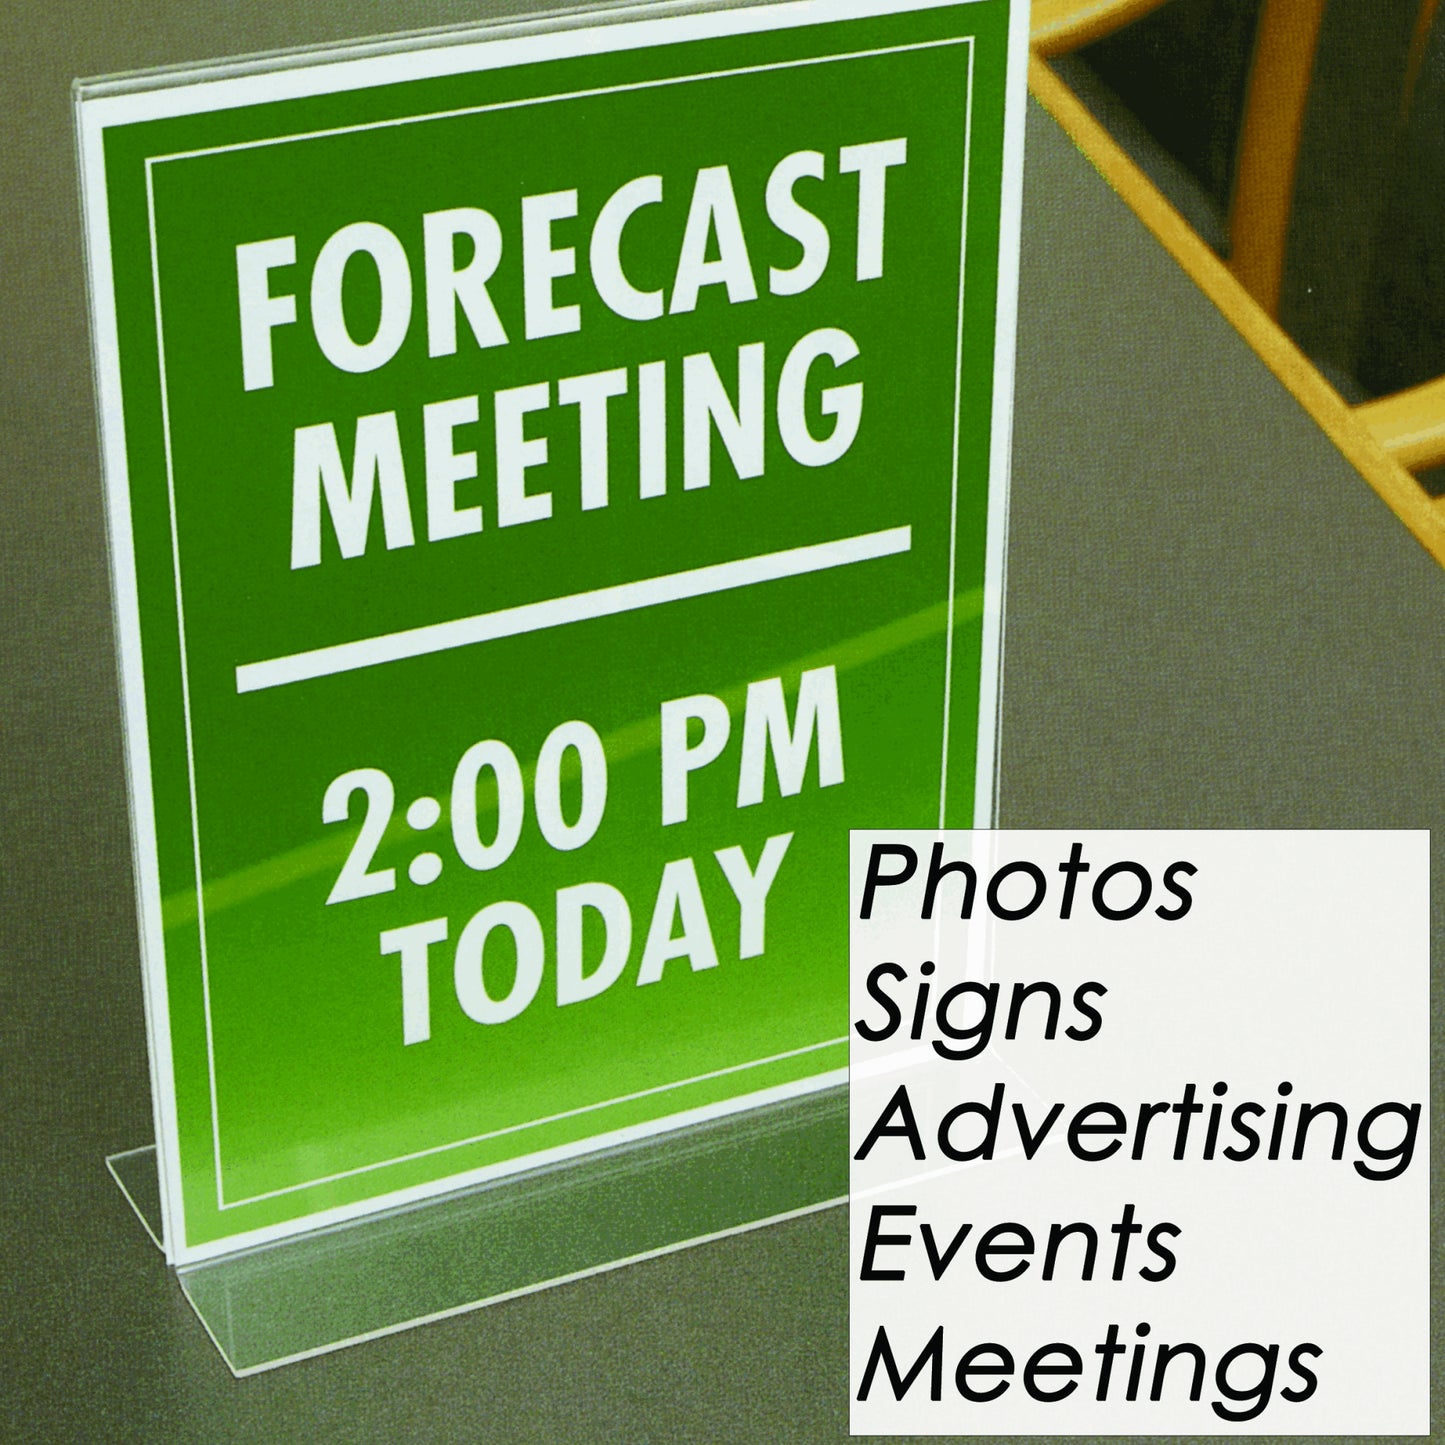 Table Top Double Sided T-Base Freestanding Sign Display Frame, 4" x 6"